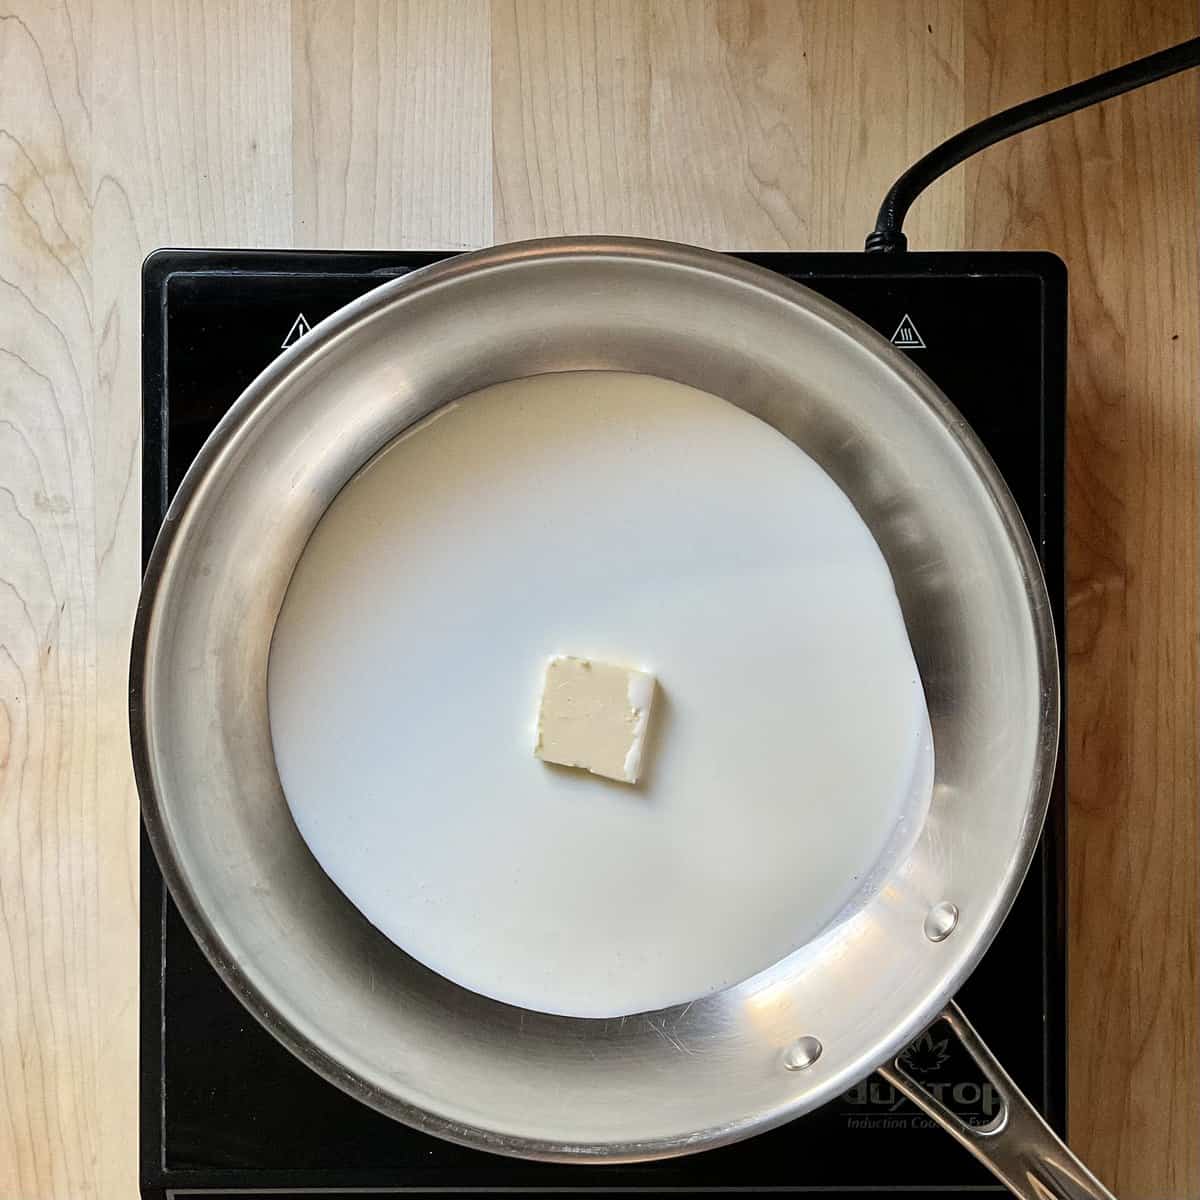 Whipping cream and butter being heated in a small pan.